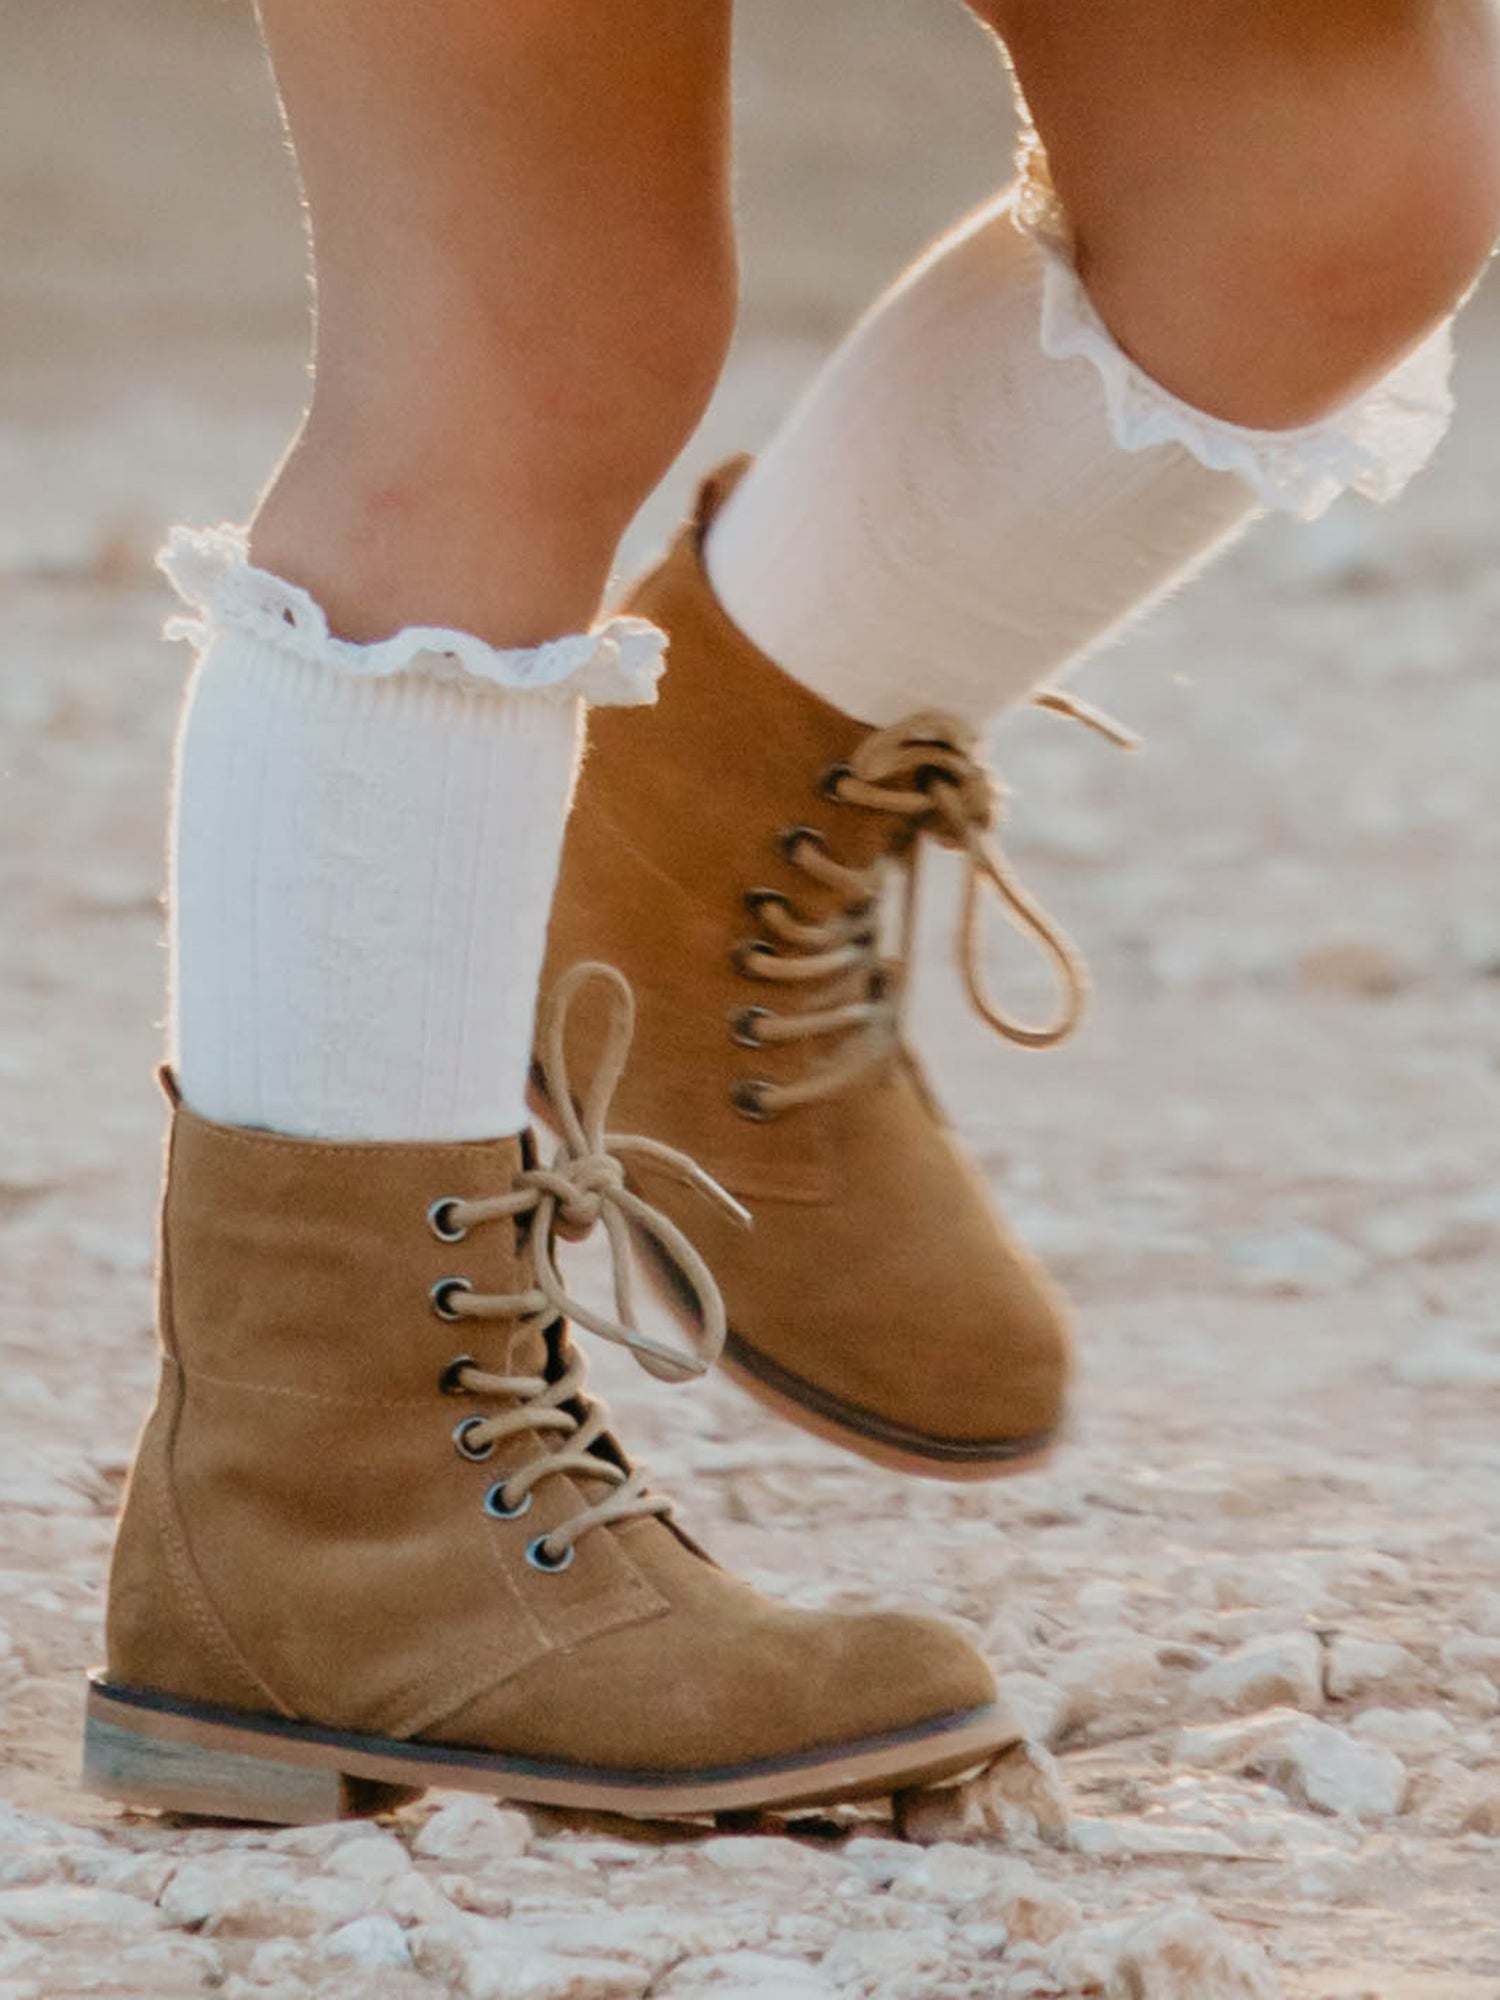 Sharp Boots. This camel suede lace-up boot has a rubber sole, metal eyelets, and nice thick laces. With a design that supports the ankle, these boots are perfect for some outdoor fun.